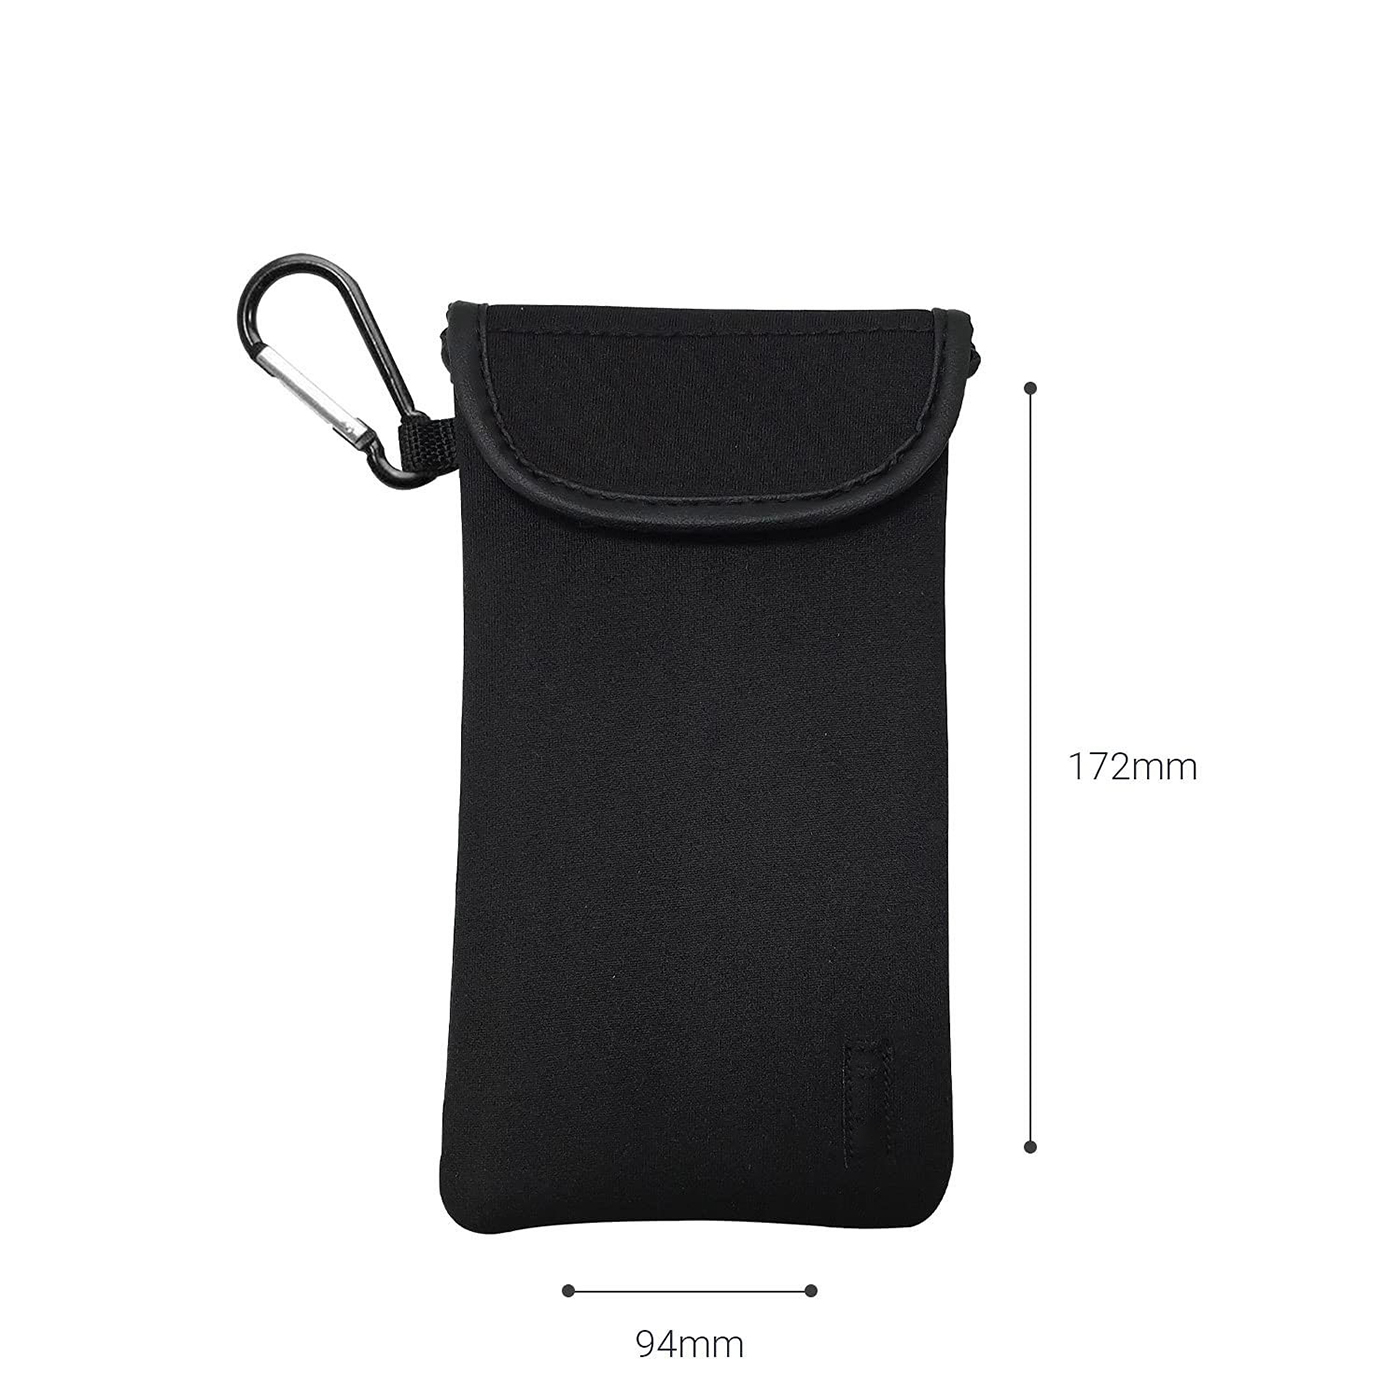 Neoprene Smartphone Pouch With Carabiner2